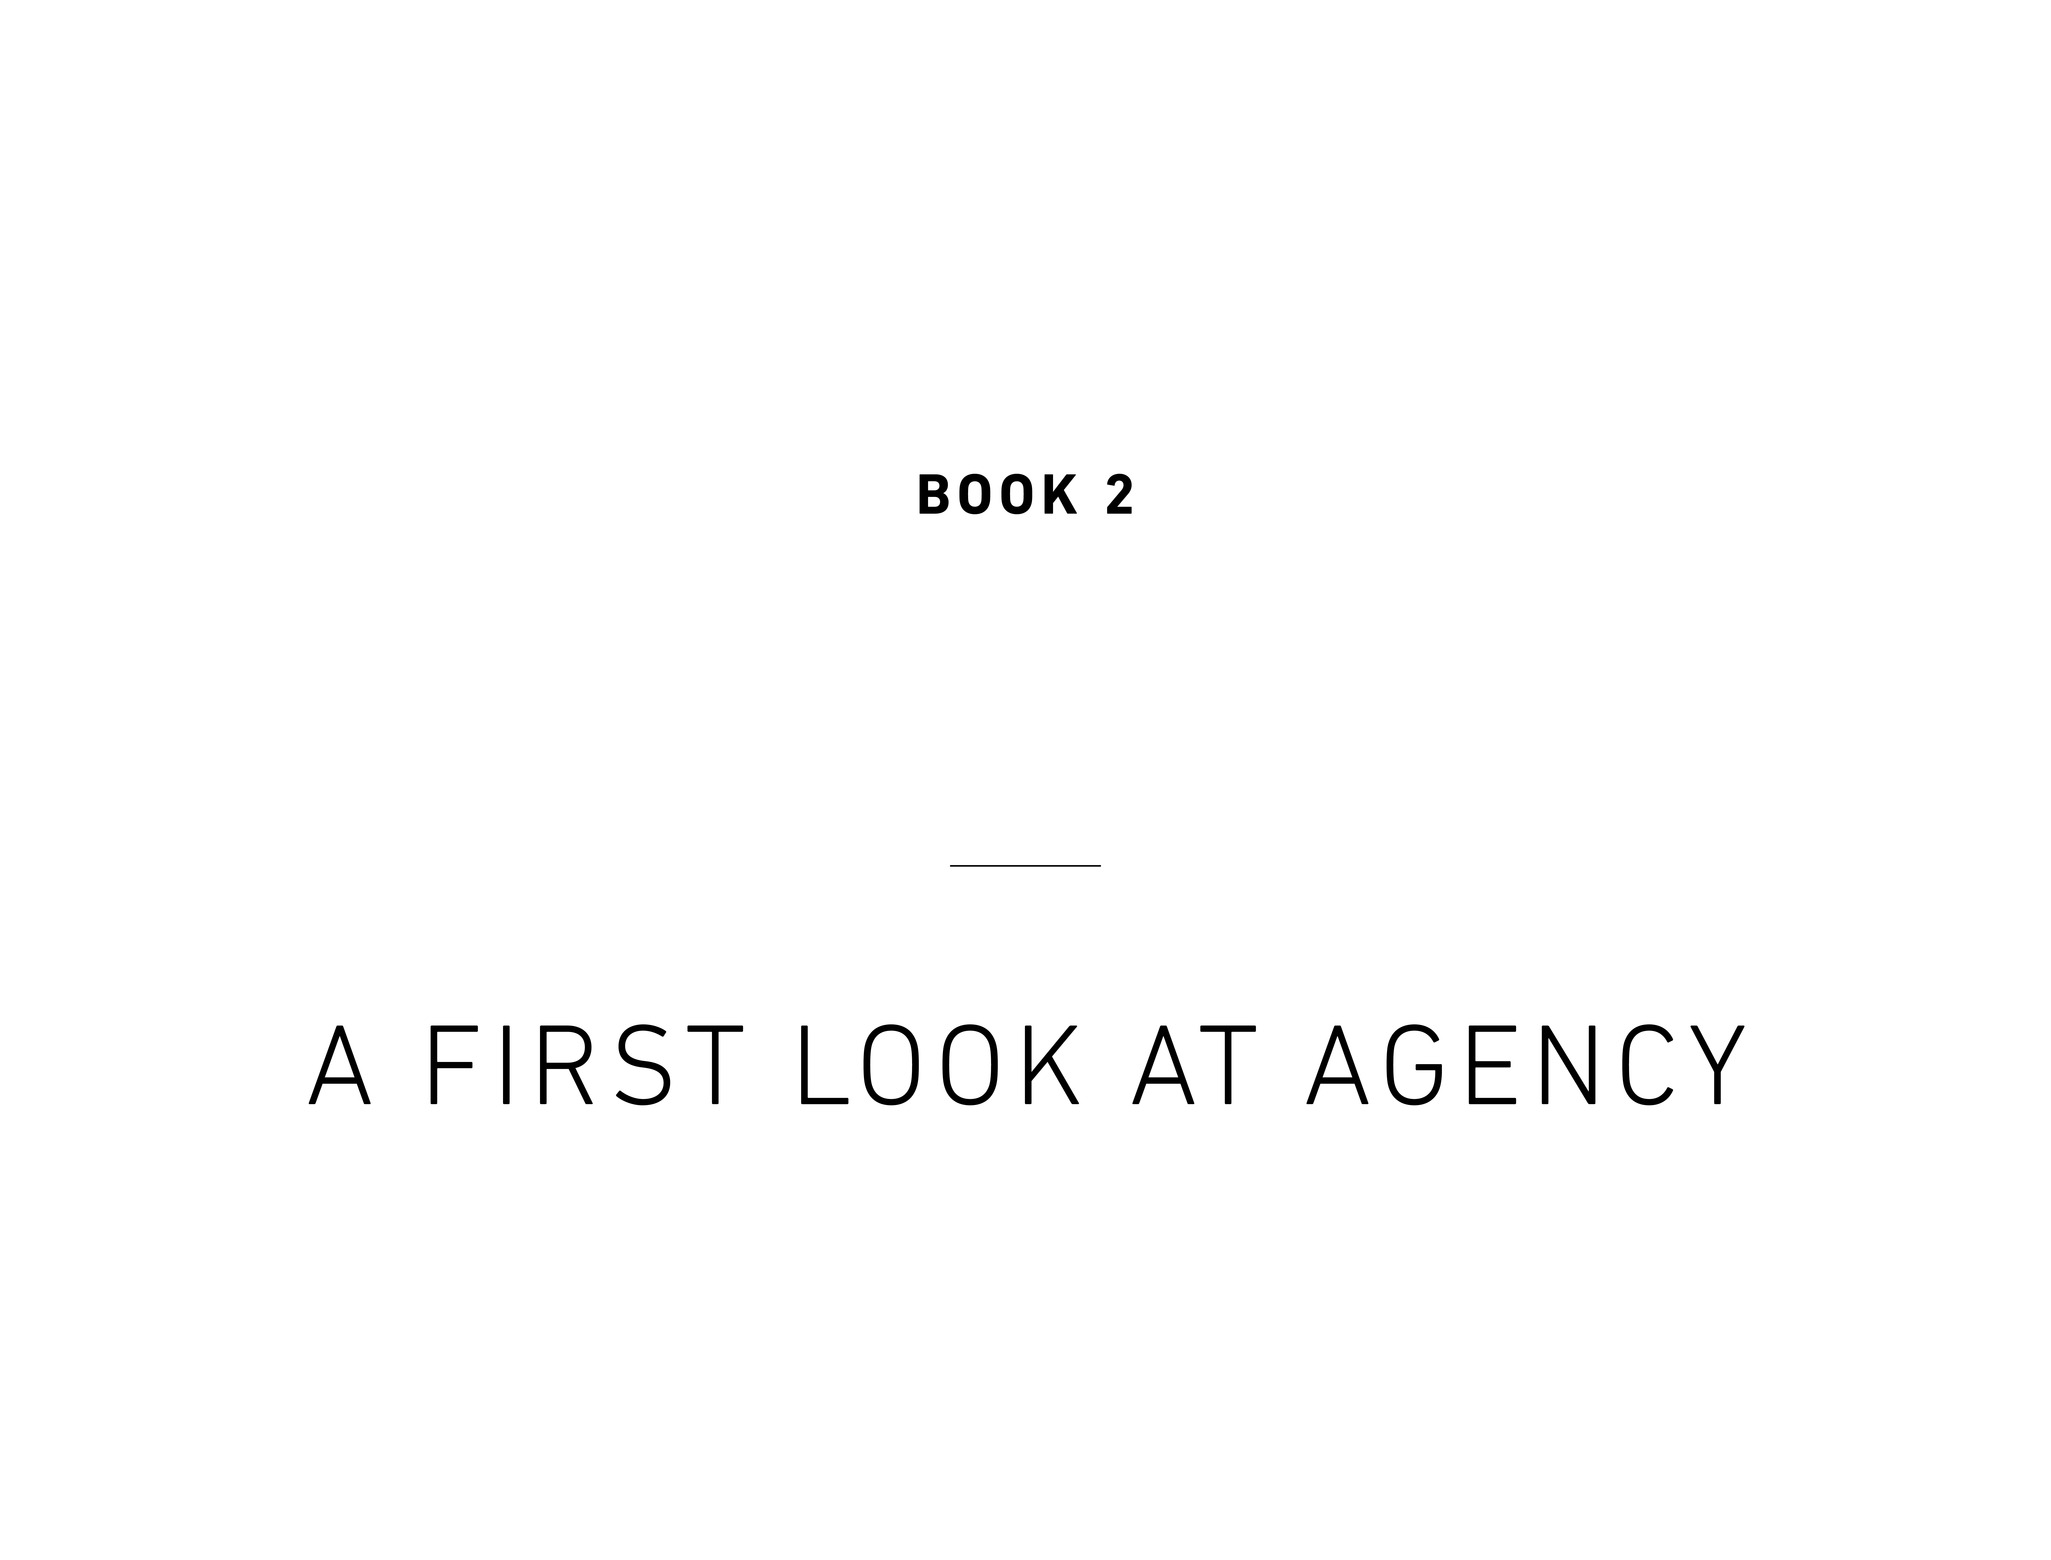 Book 2 A First Look at Agency